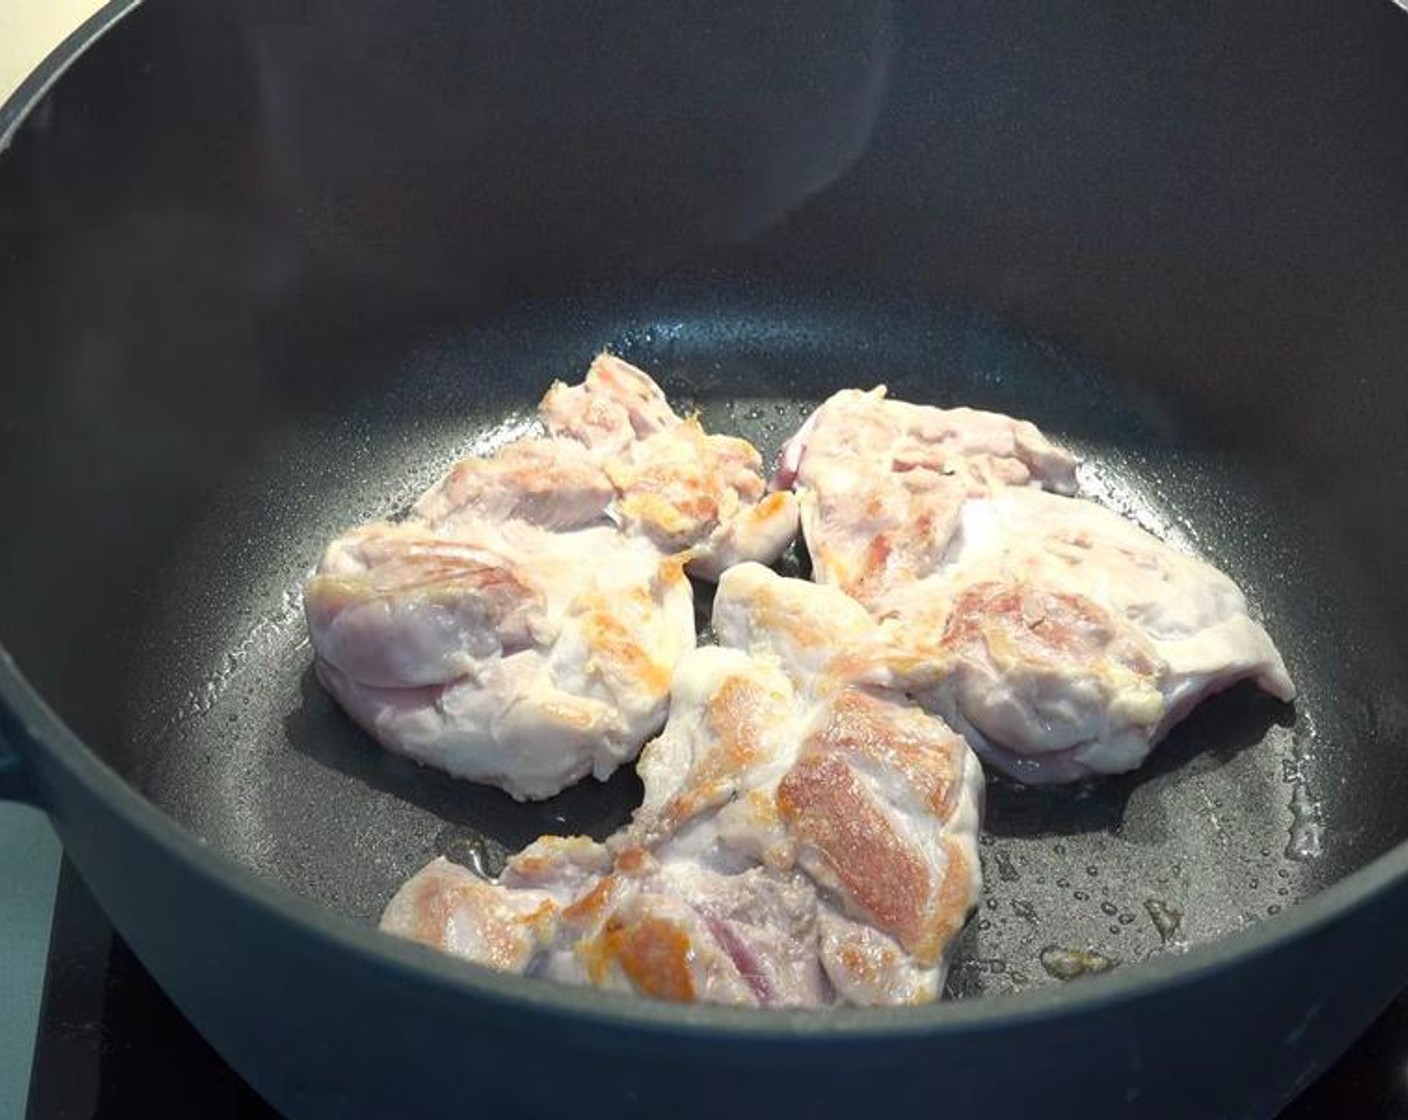 step 1 In a large pot over medium heat, add Boneless, Skinless Chicken Thighs (8) in batches. Cook for about 2 minutes on each side, or until lightly browned. You don't need to cook it all the way through. Set aside.